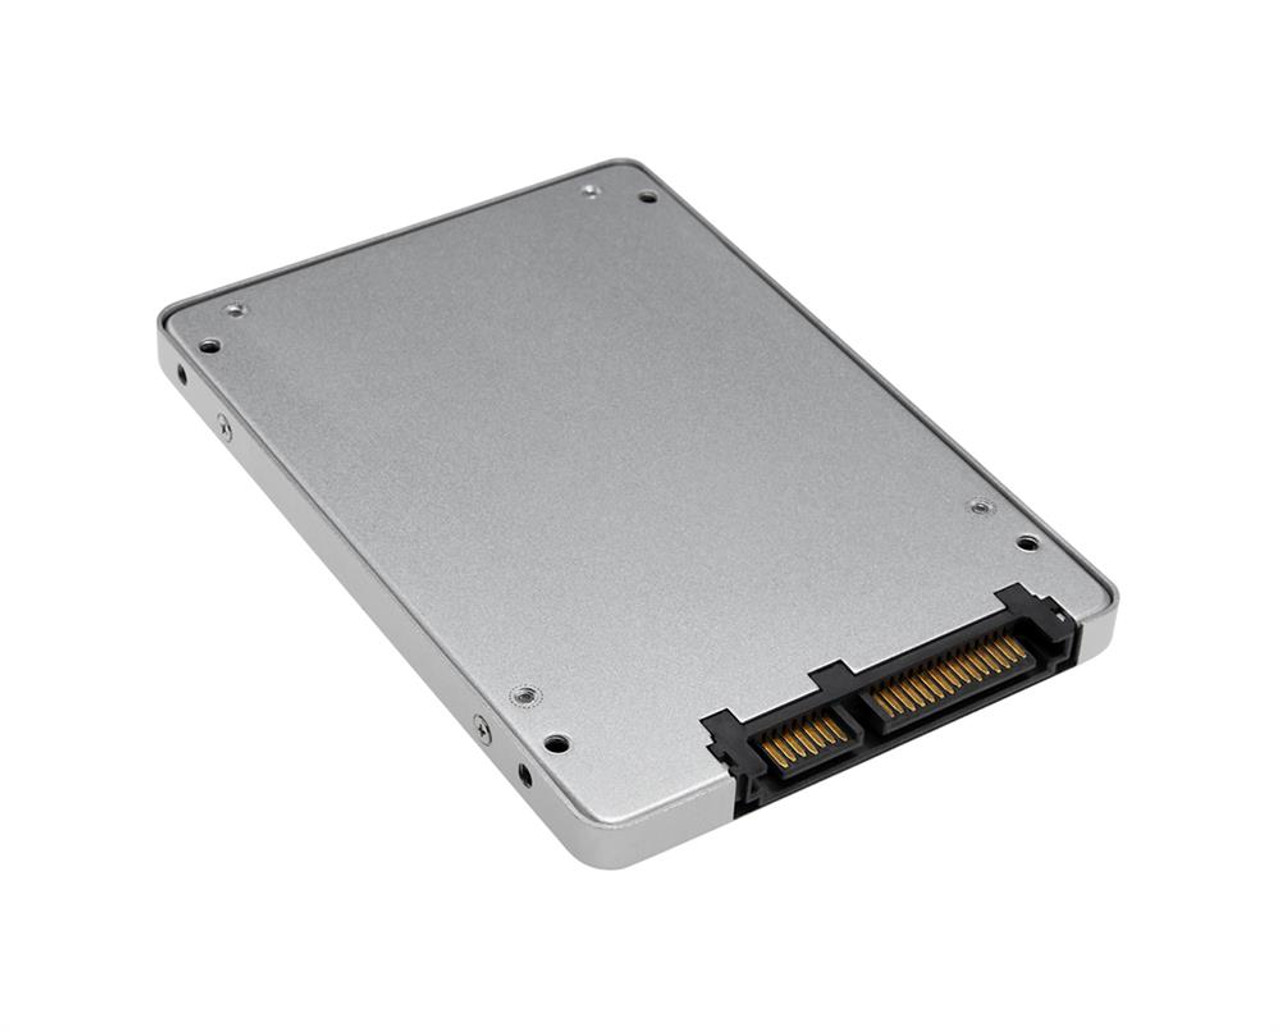 03B01-00051400 ASUS 128GB SATA 6Gbps 2.5-inch Internal Solid State Drive (SSD)